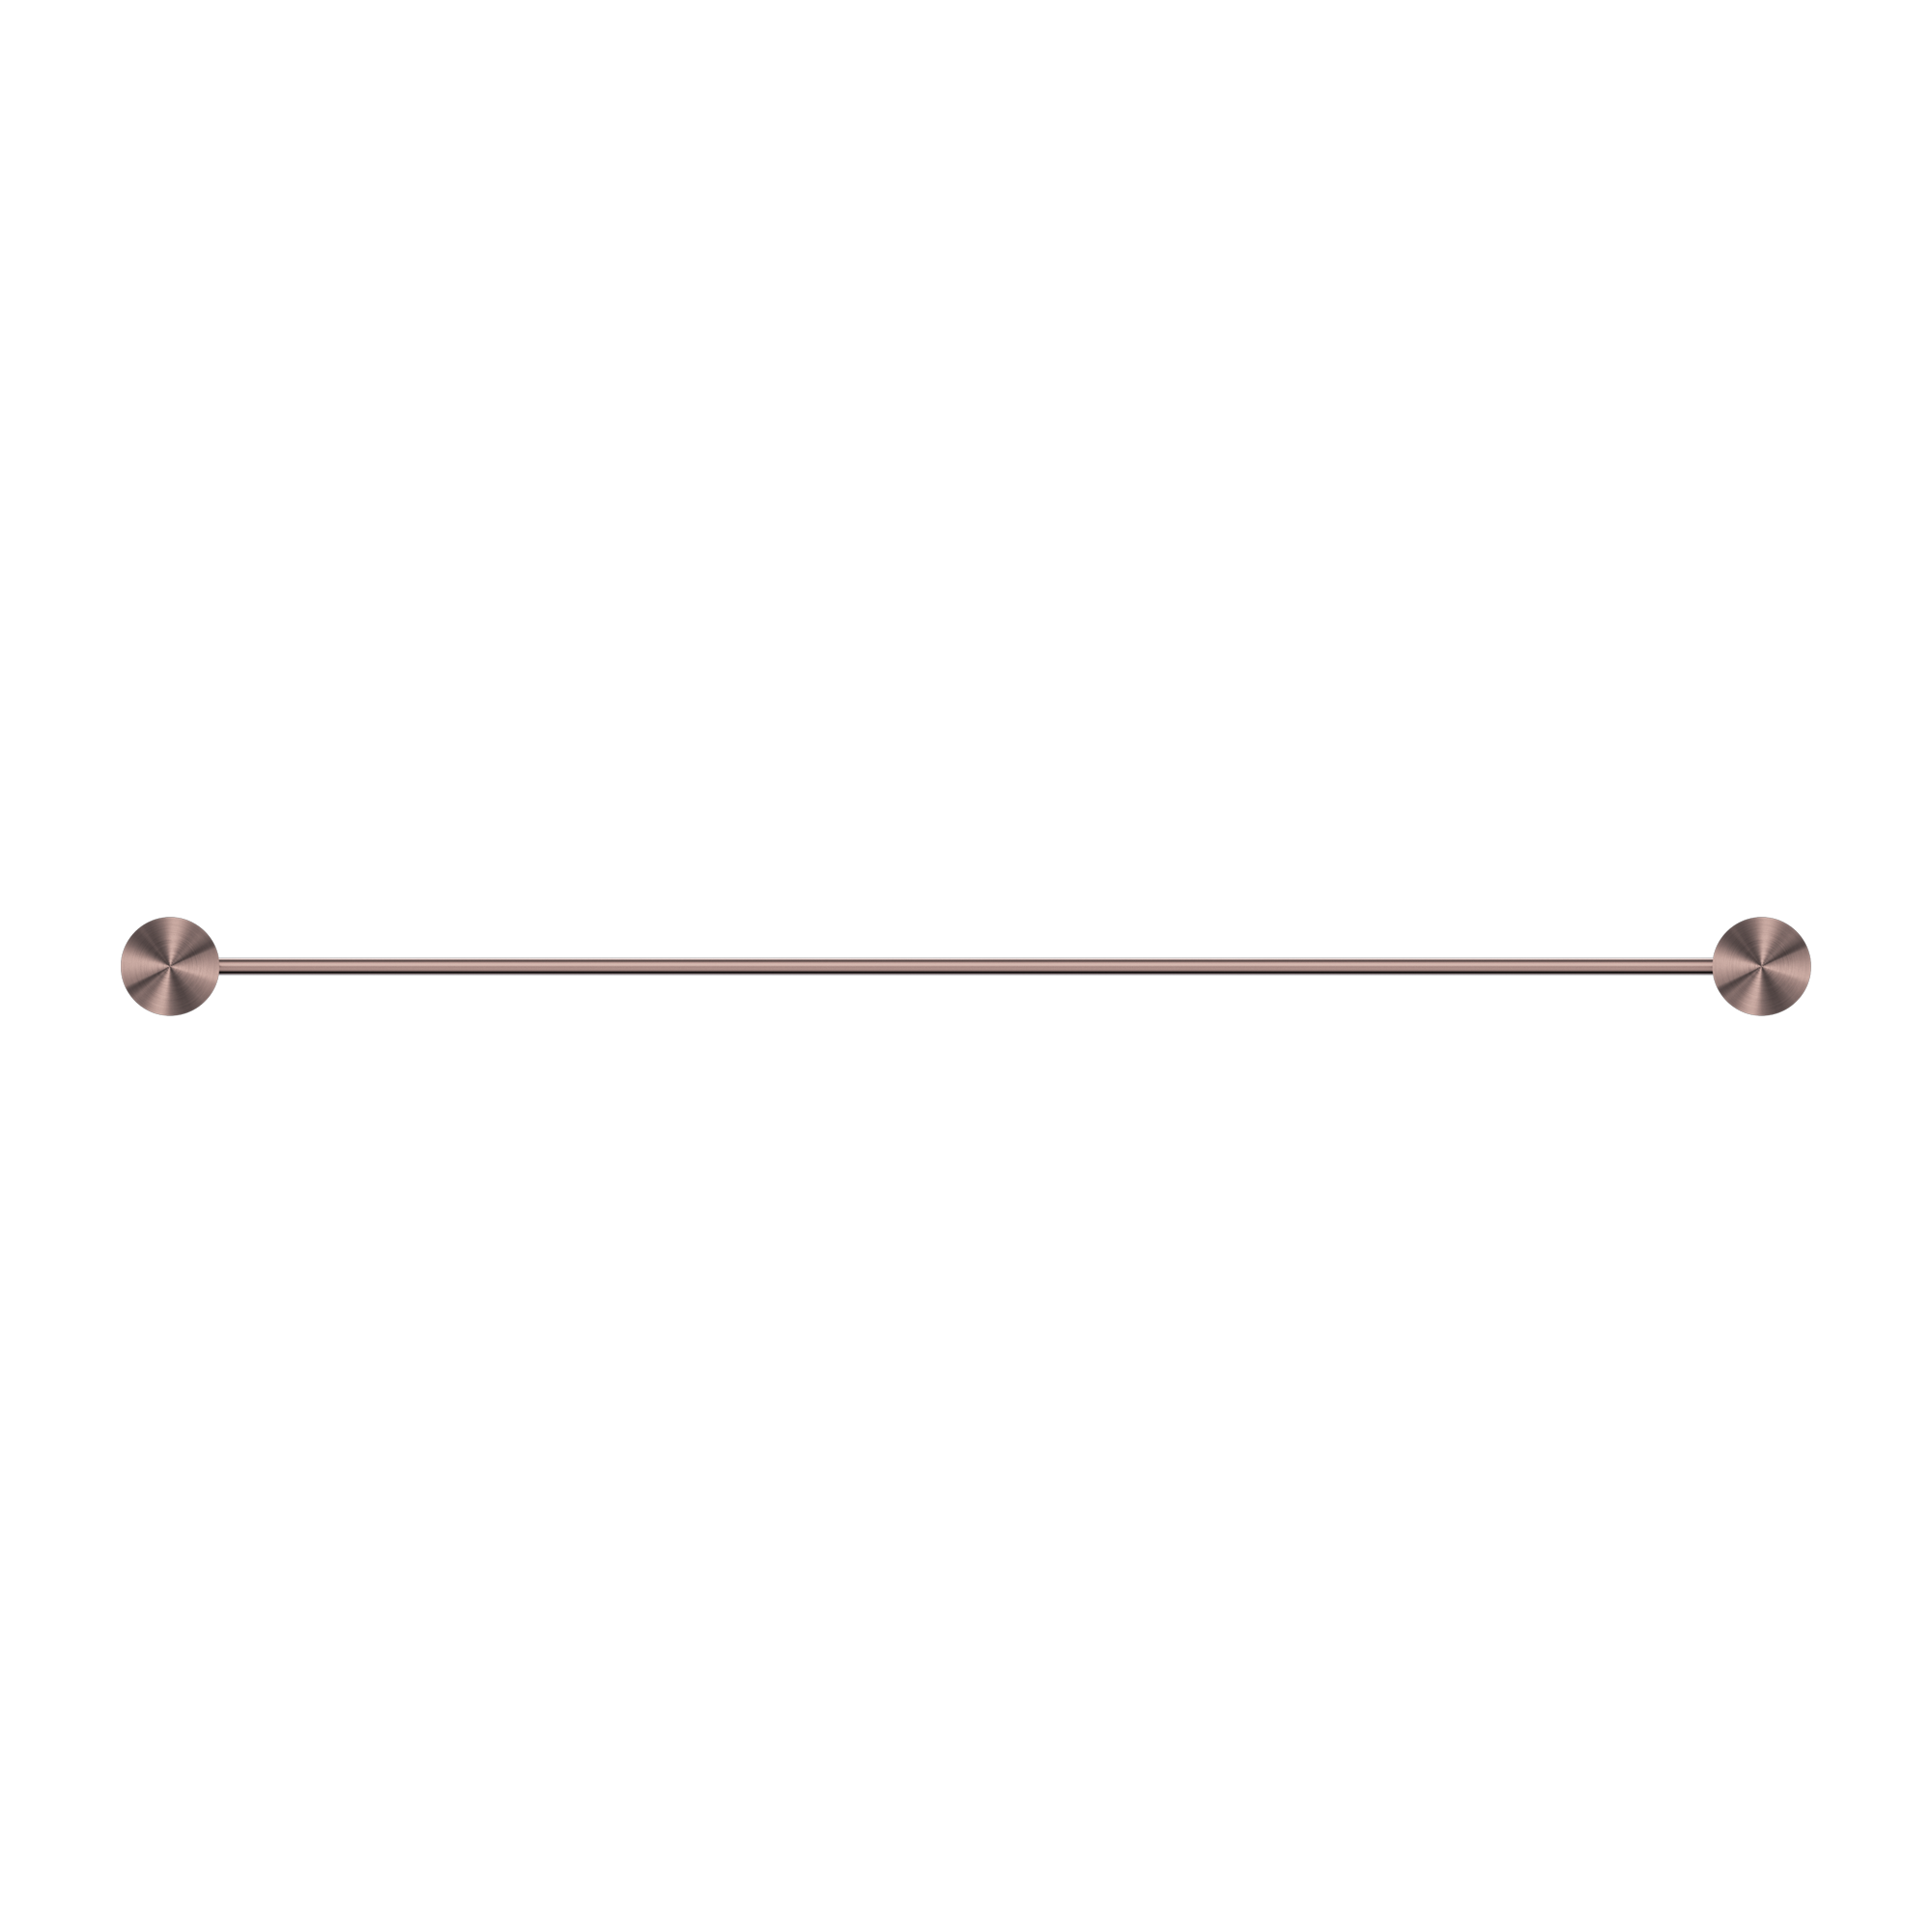 NERO OPAL NON-HEATED SINGLE TOWEL RAIL BRUSHED BRONZE (AVAILABLE IN 600MM AND 800MM)